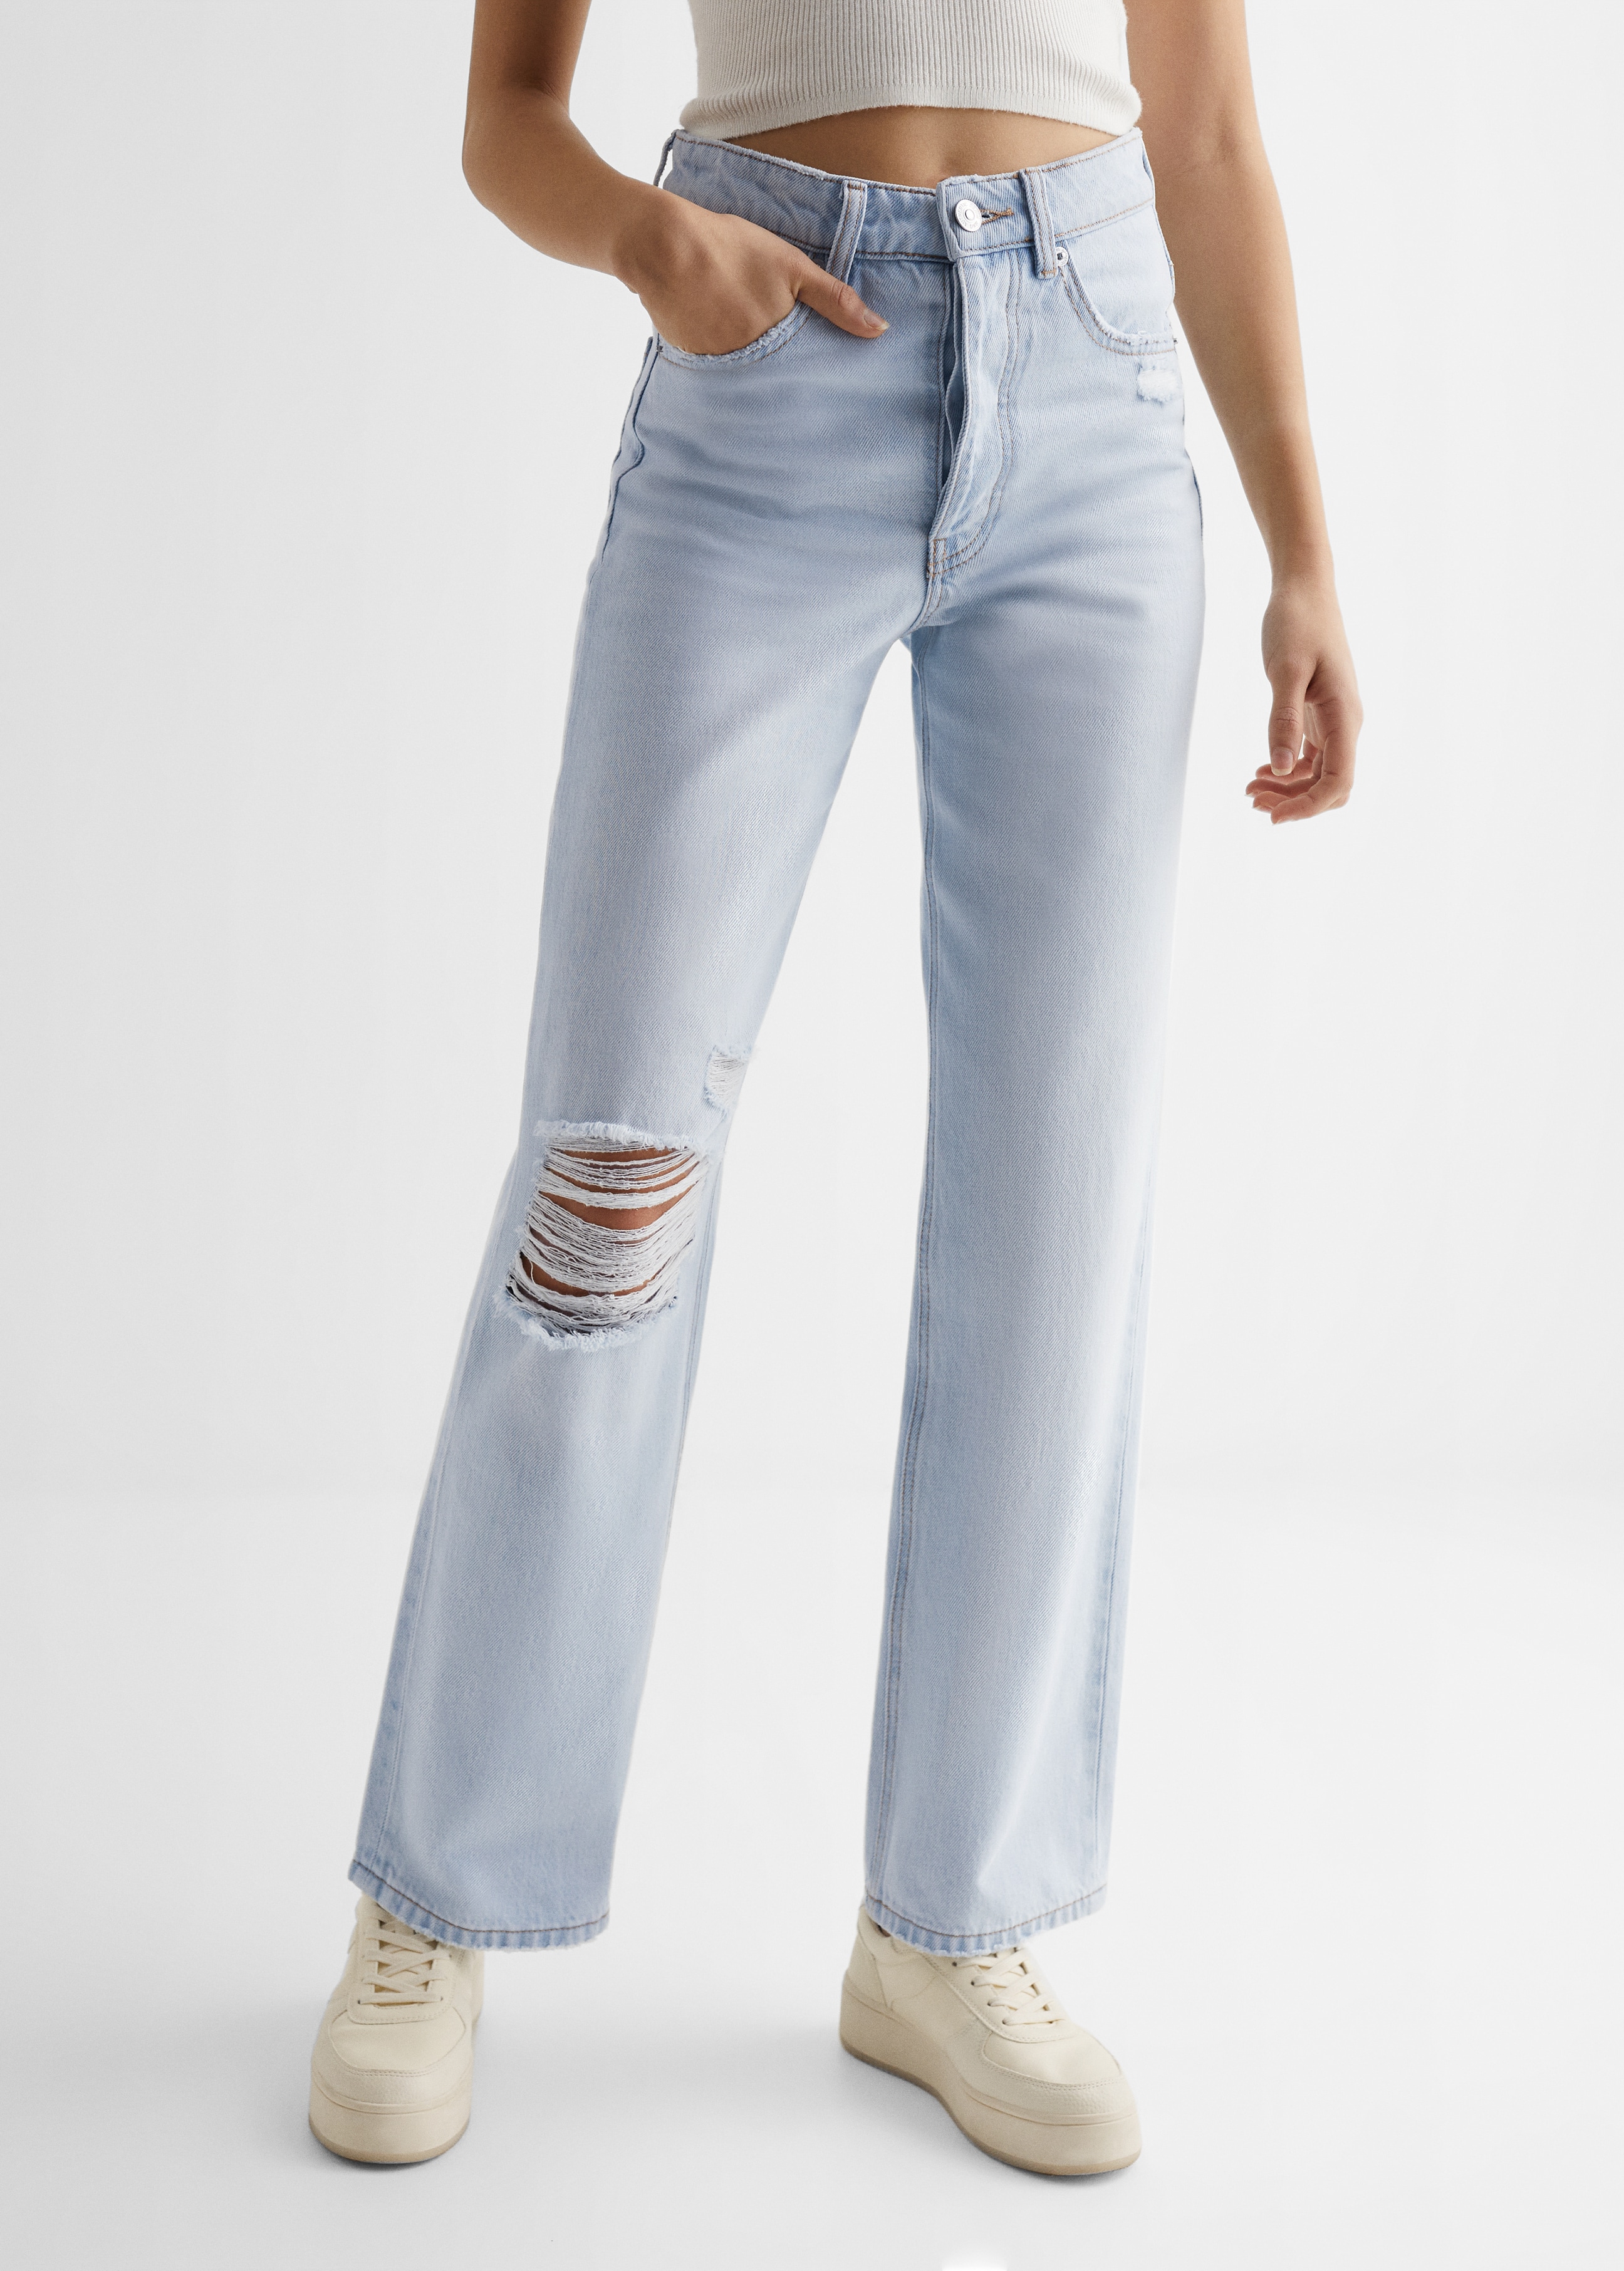 Decorative ripped wideleg jeans - Details of the article 6